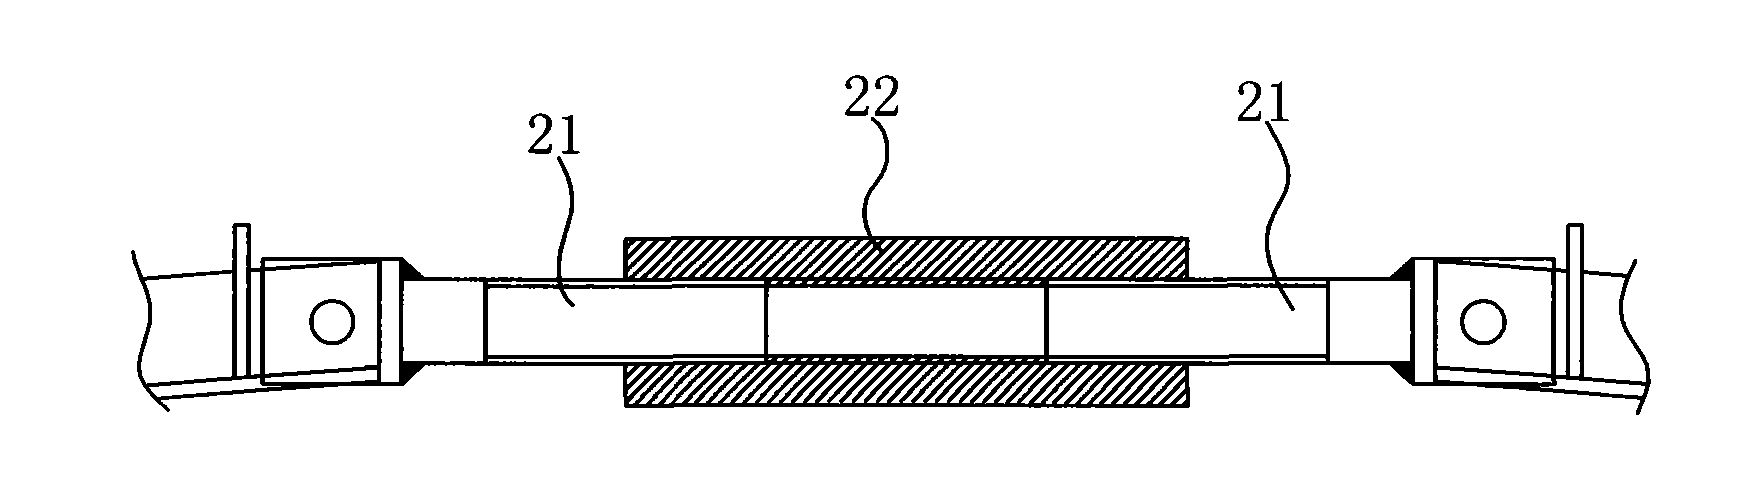 Movable water interception method for spraying water of well cylinders and well walls and movable water interception trough